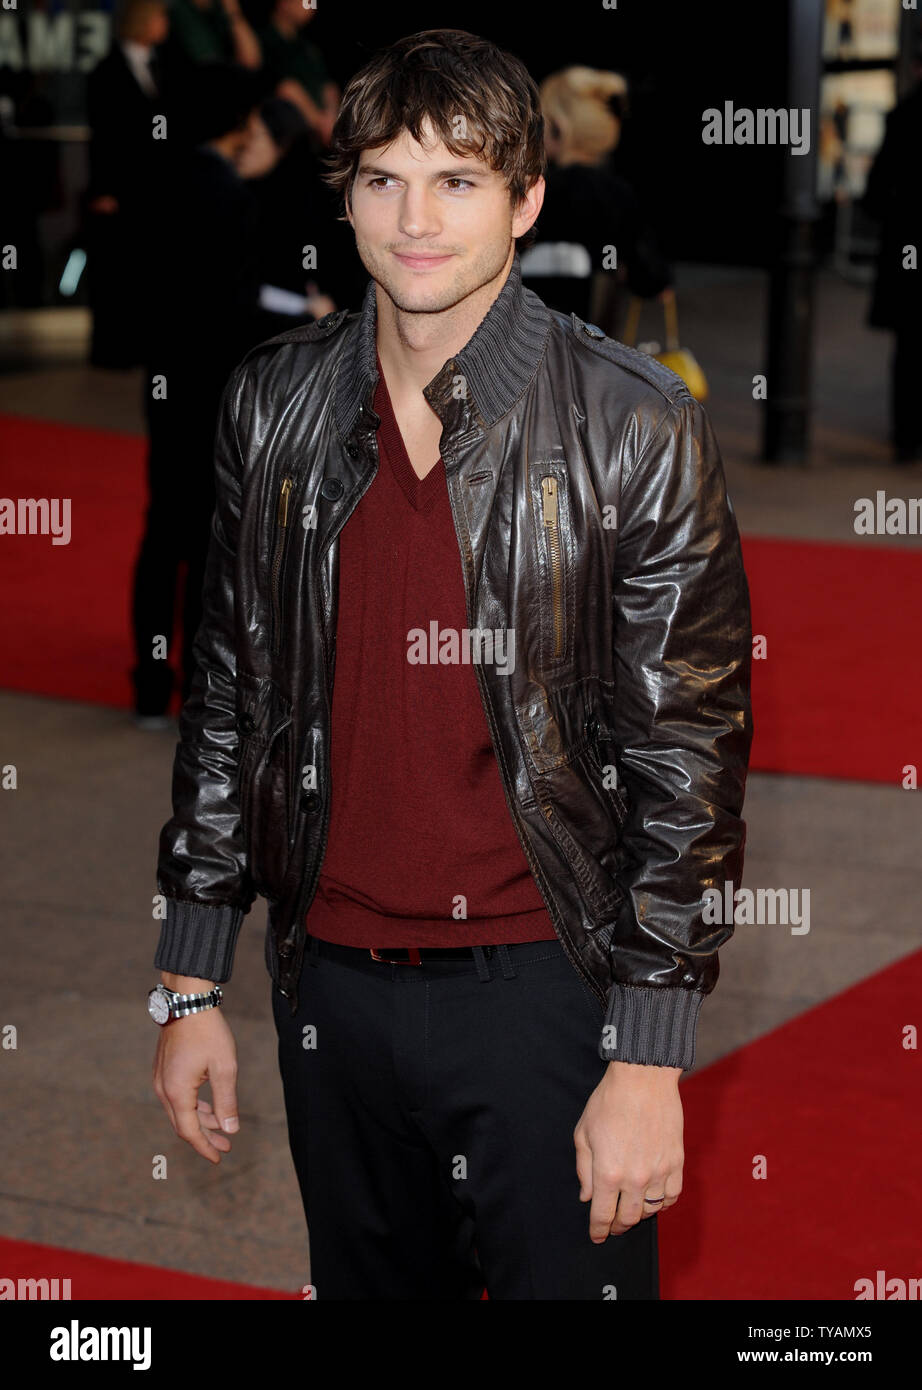 American actor Ashton Kutcher attends the premiere of 'What Happens In Vegas' at Odeon, Leicester Square in London on April 22, 2008.  (UPI Photo/Rune Hellestad) Stock Photo